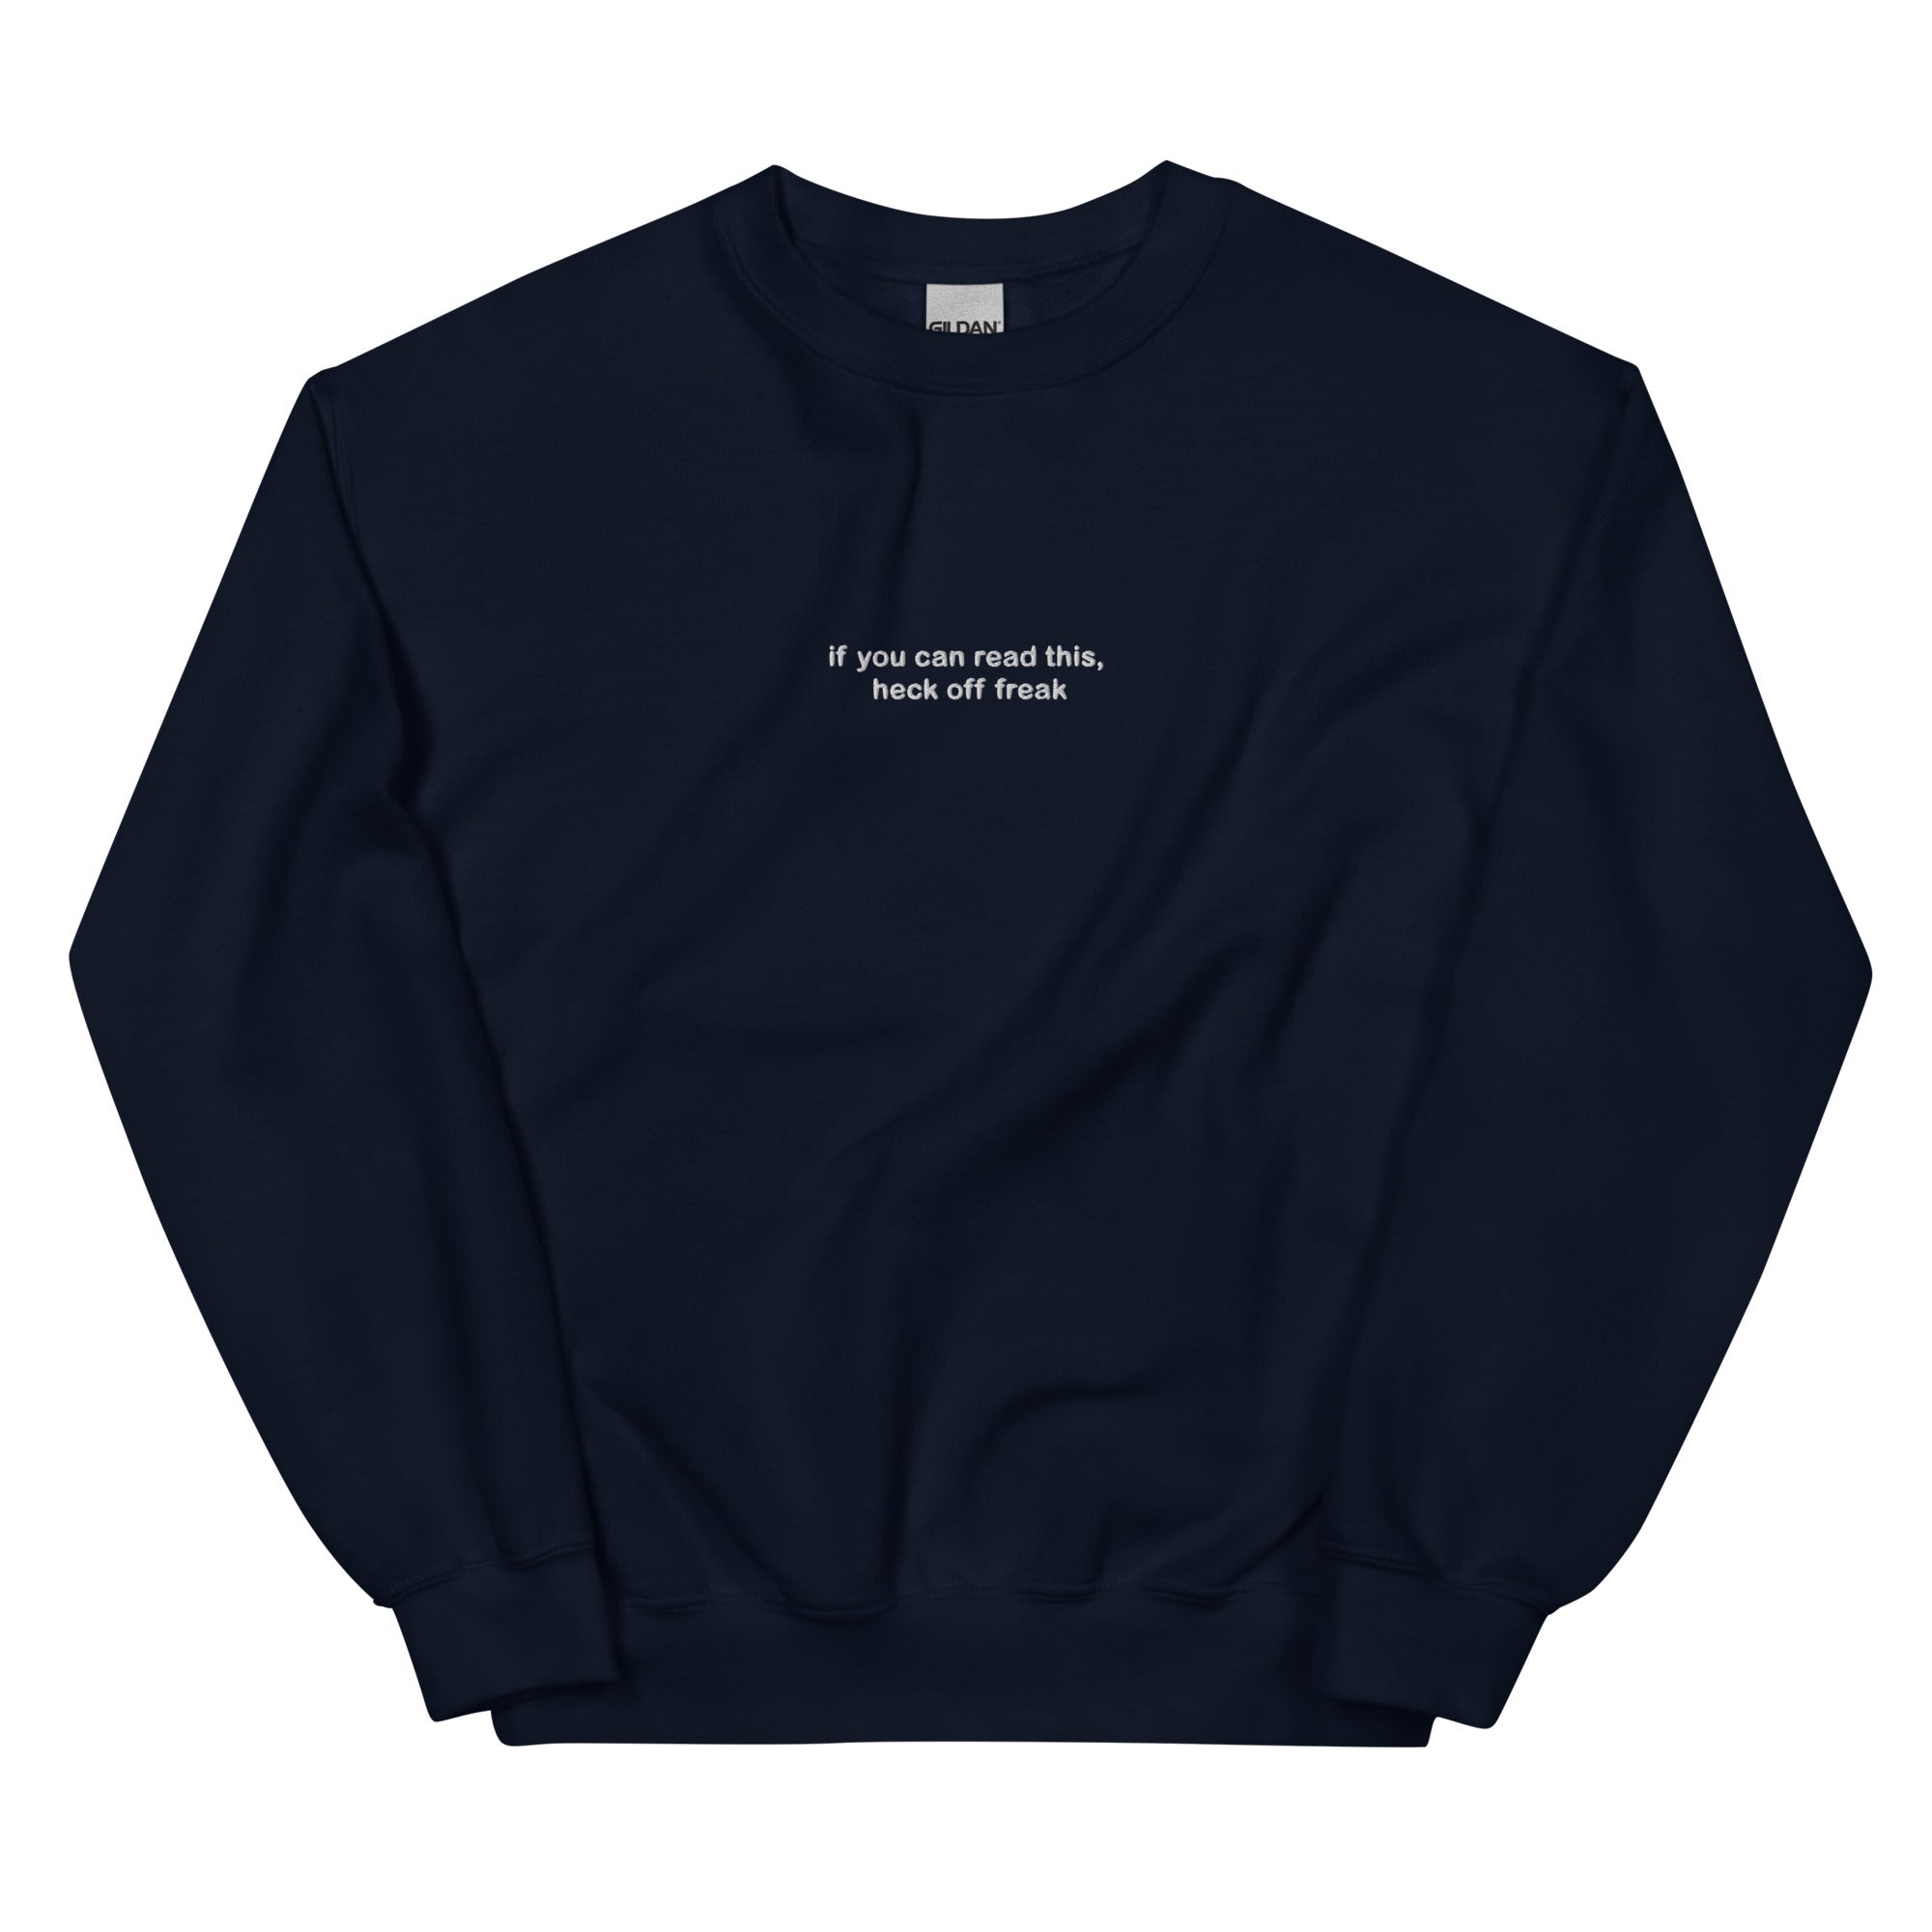 "If You Can Read This, Heck Off Freak" White Embroidered Adult Unisex Sweatshirt